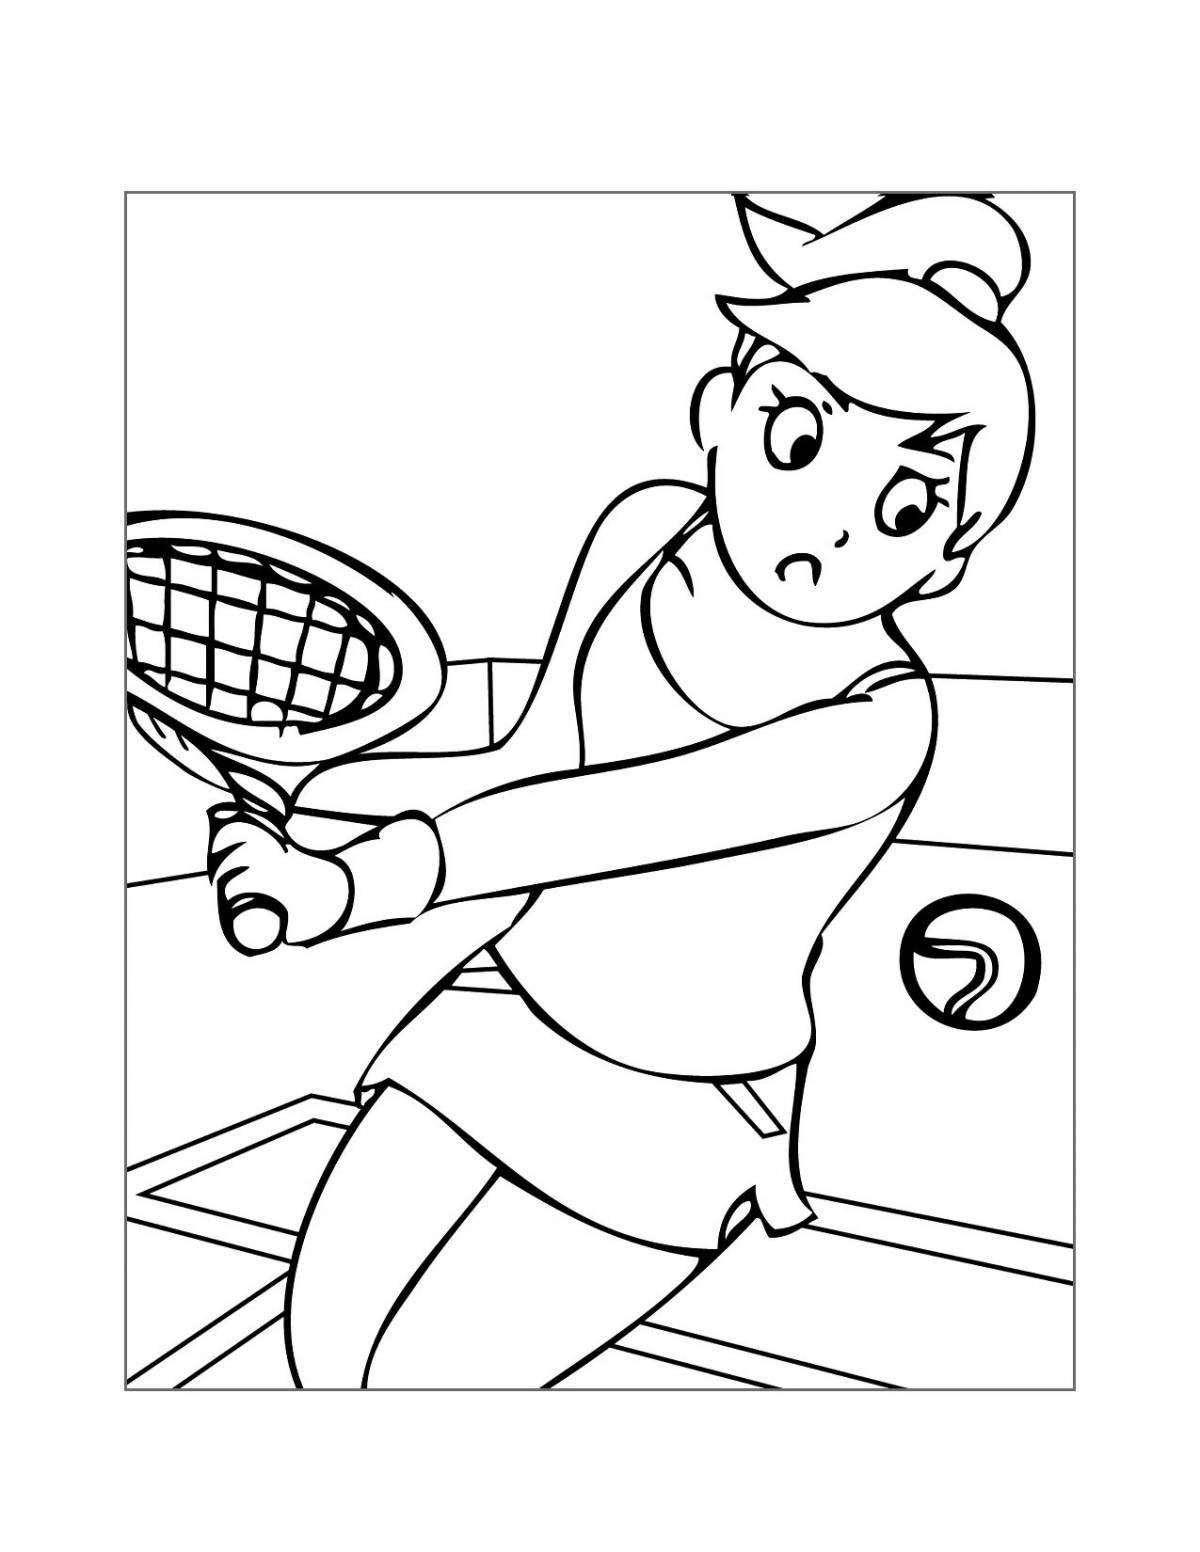 Stimulating coloring for children's olympic sports